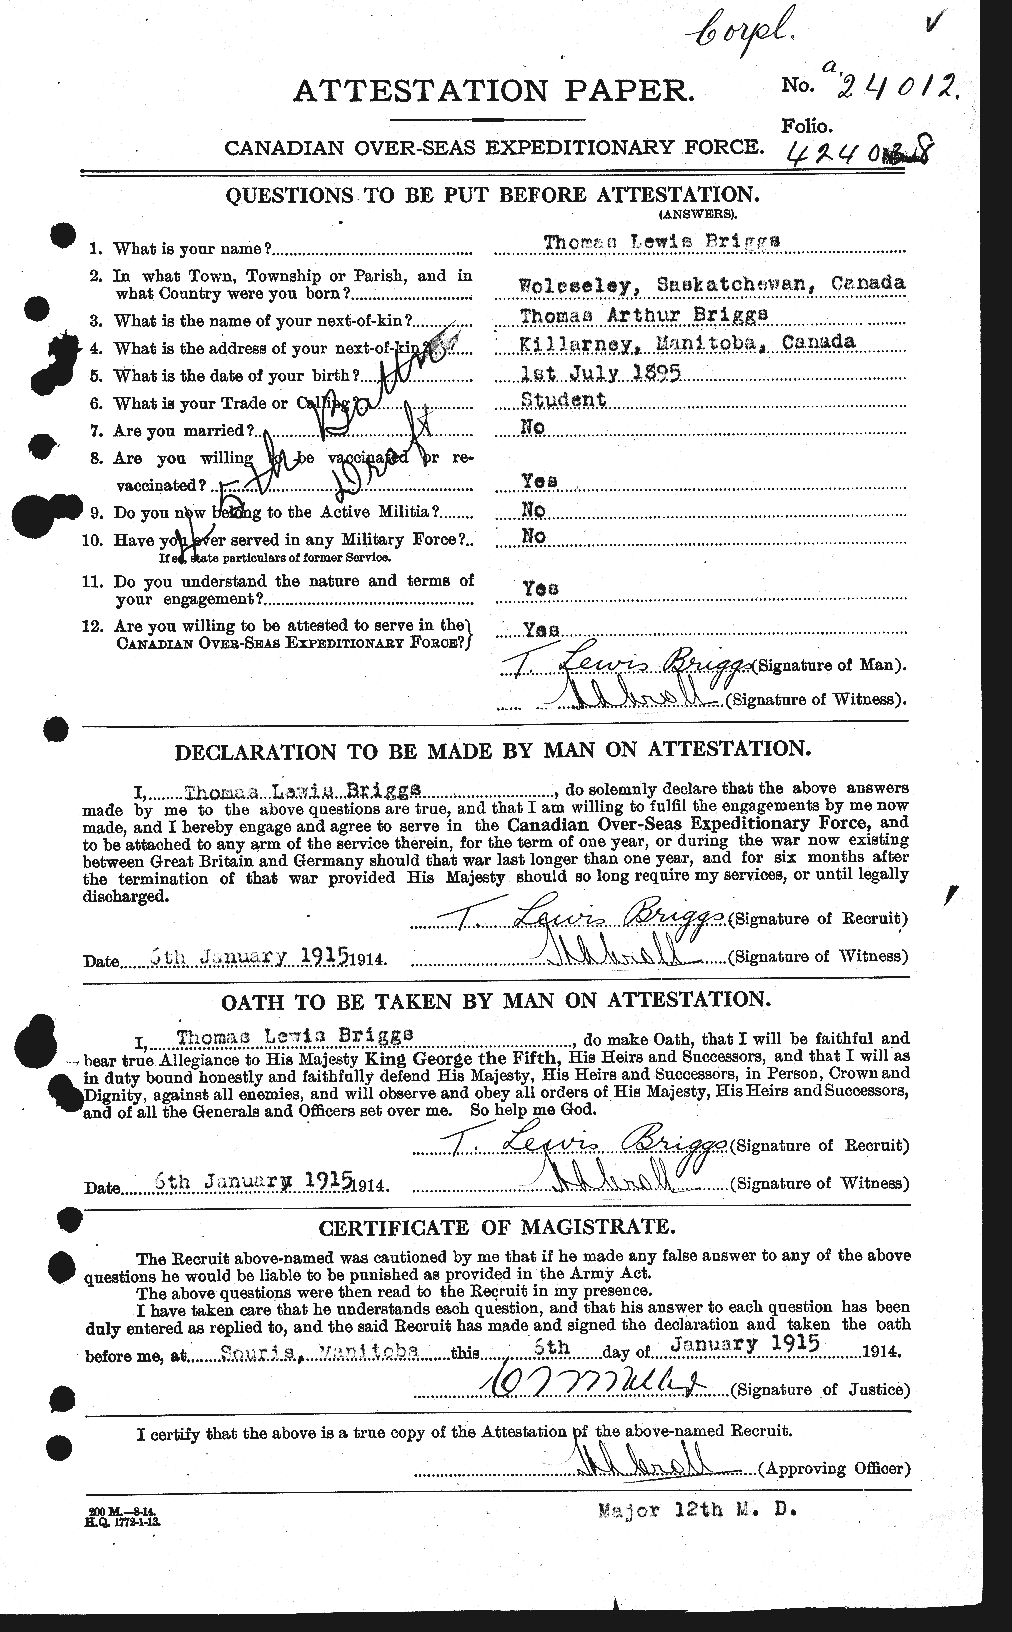 Personnel Records of the First World War - CEF 264105a